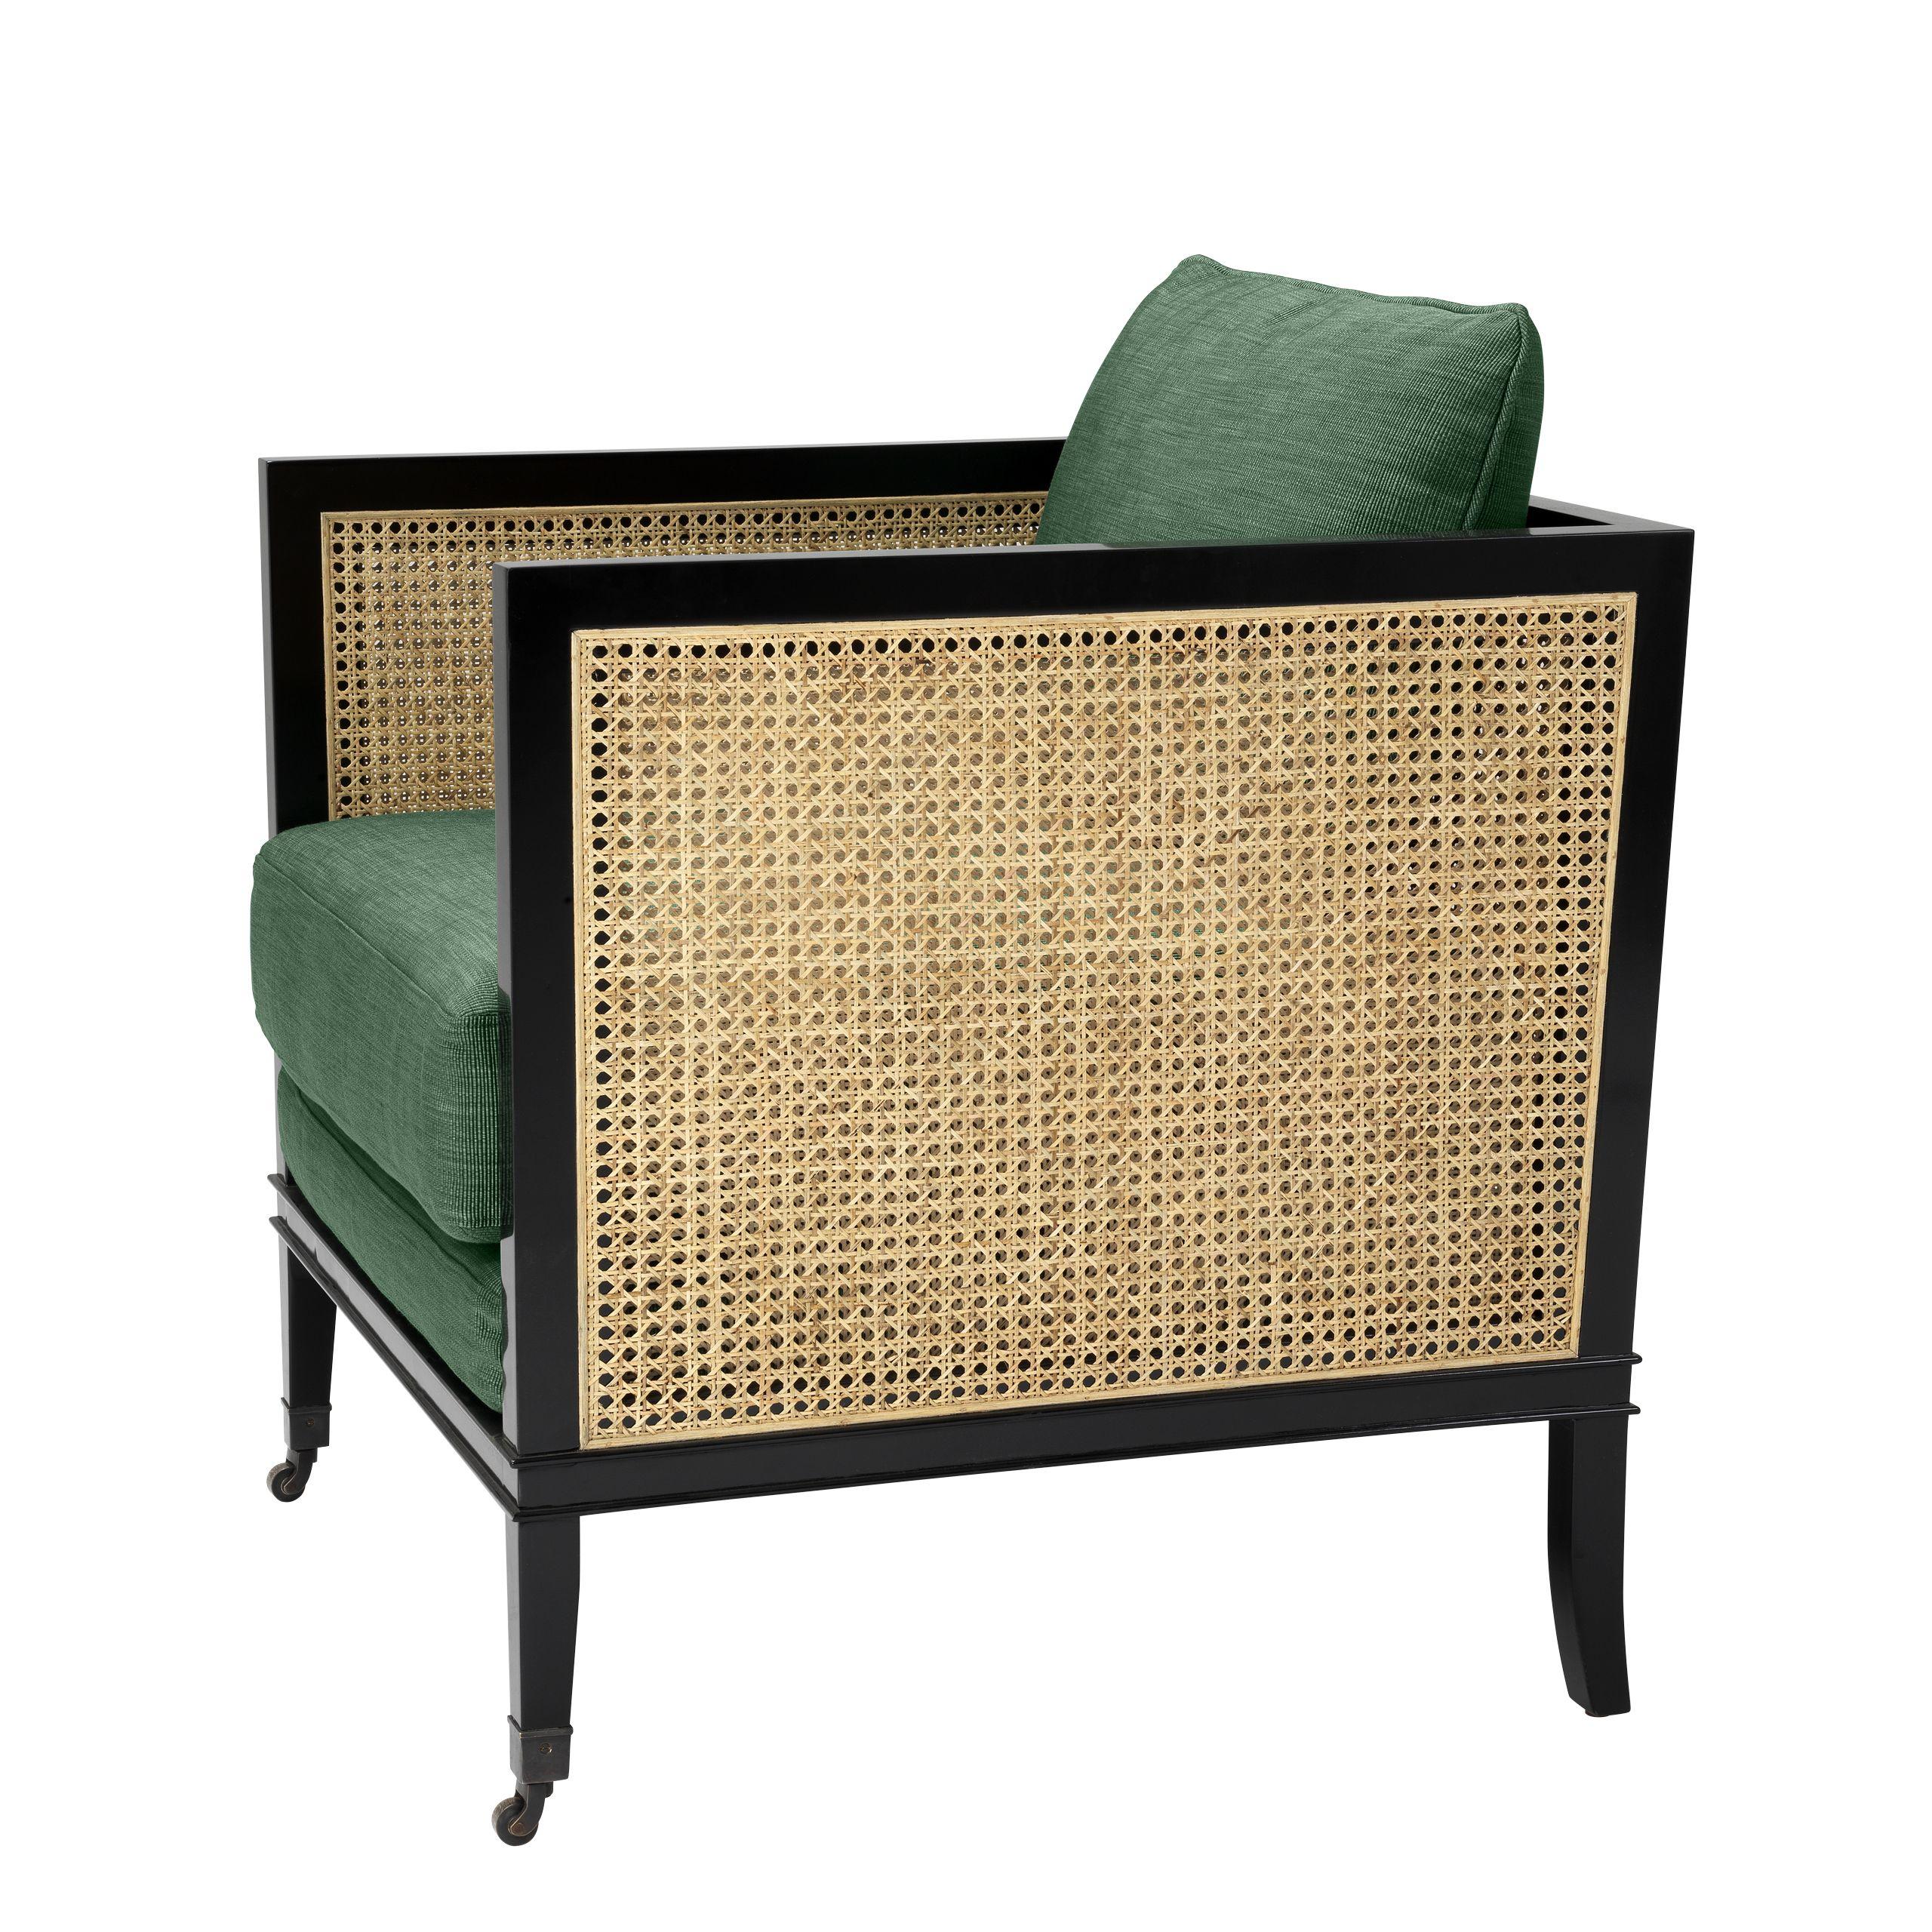 Black lacquer wooden structure brass wheels finish adorned with woven cane panels and green fabric Art Deco style lounge armchair.